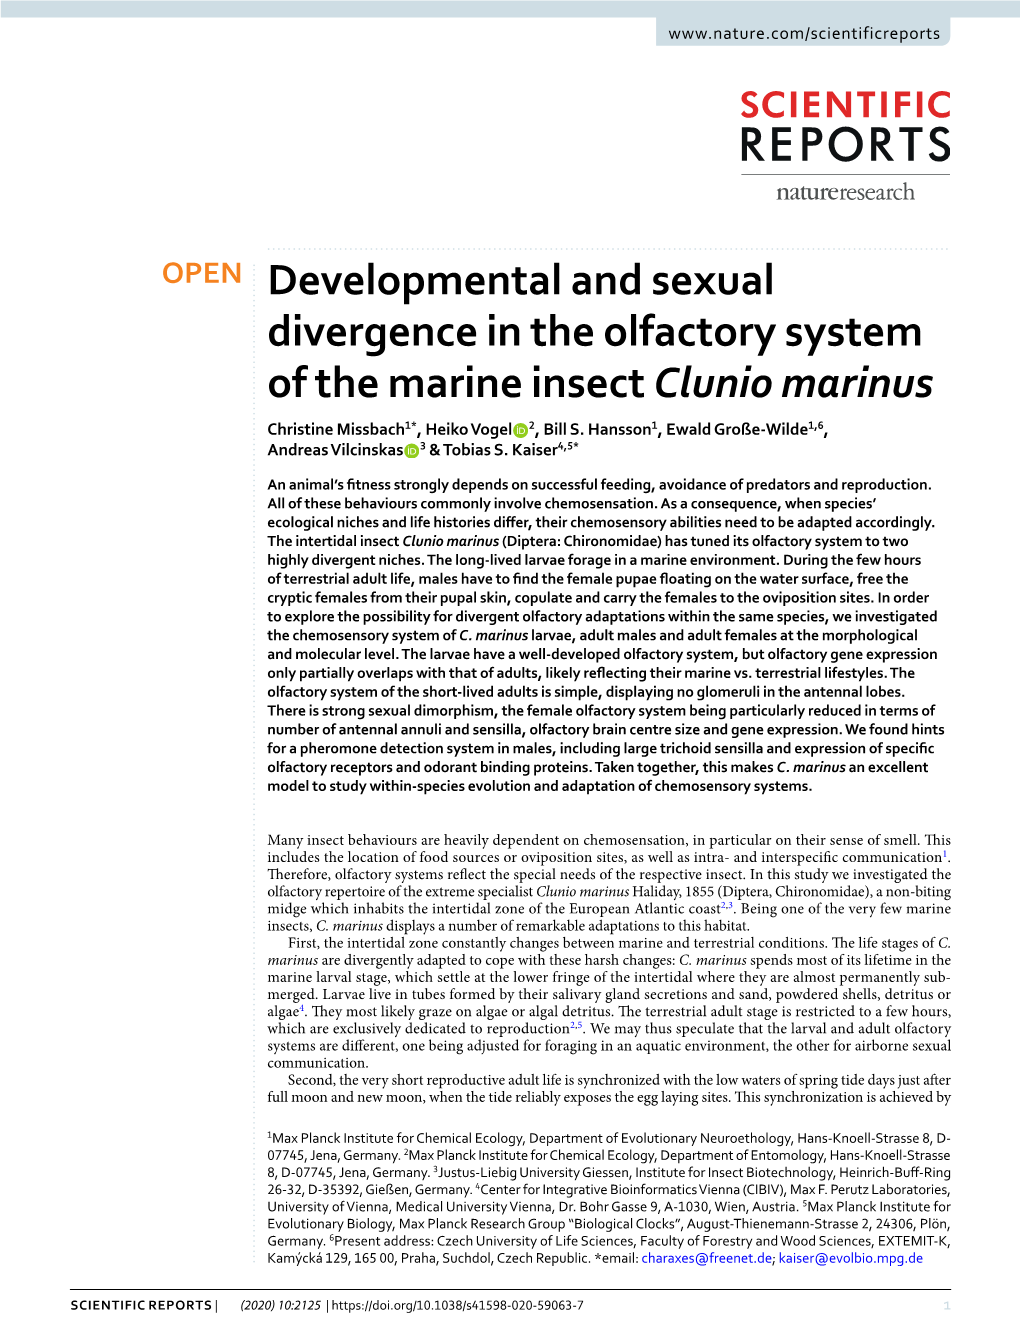 Developmental and Sexual Divergence in the Olfactory System of the Marine Insect Clunio Marinus Christine Missbach1*, Heiko Vogel 2, Bill S